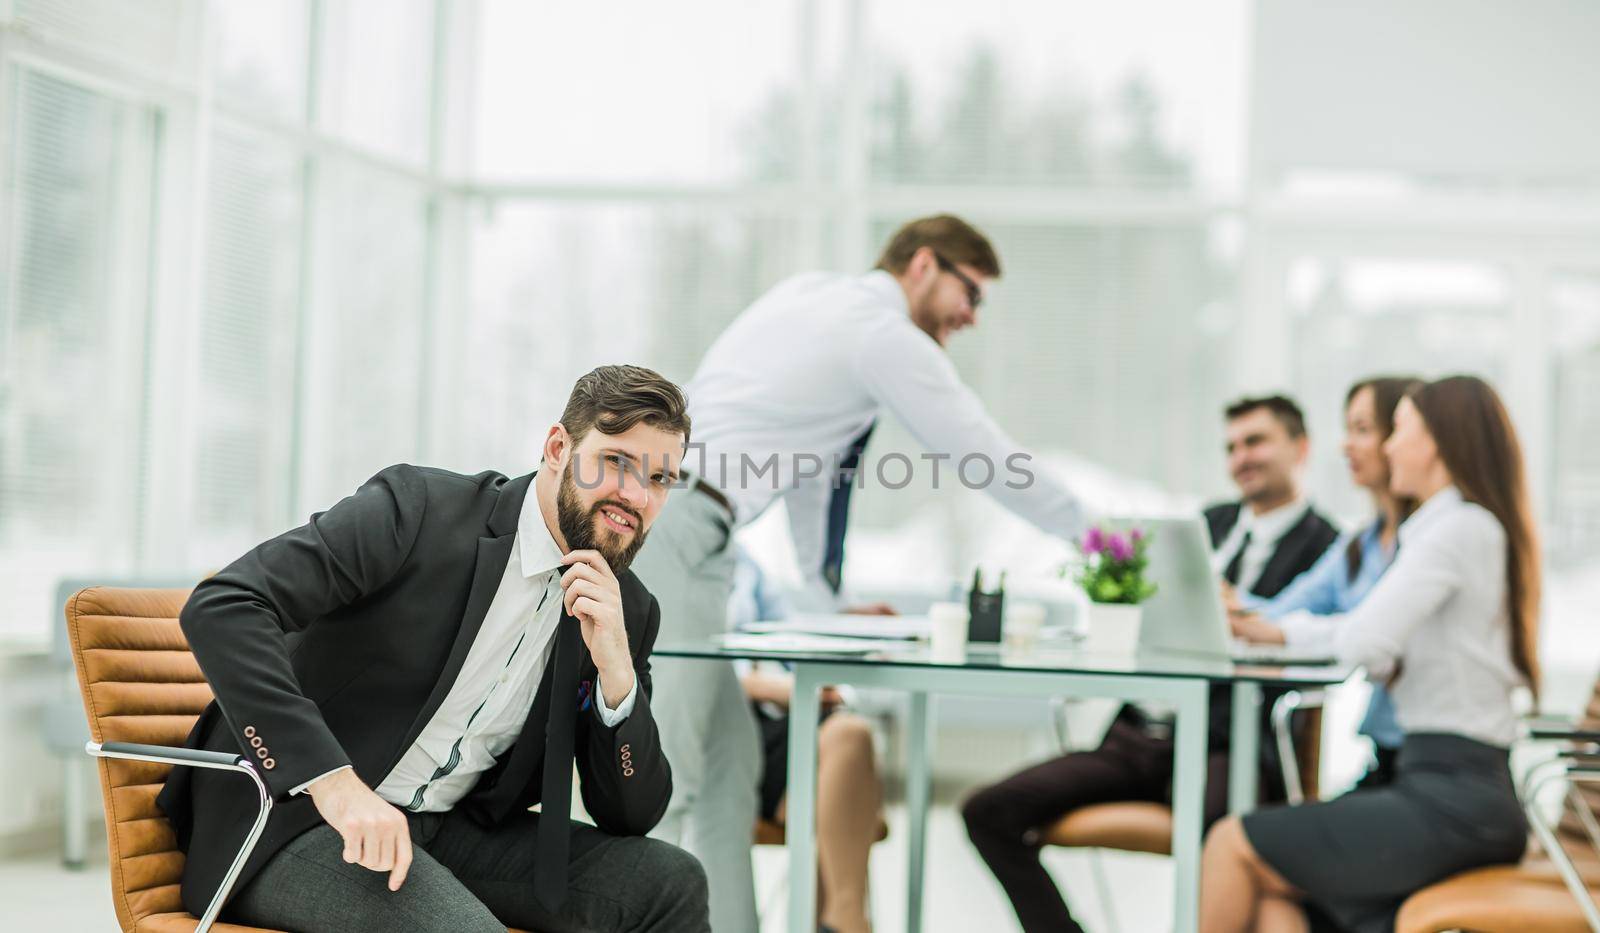 Manager on the background of business team working in office.the photo has a empty space for your text